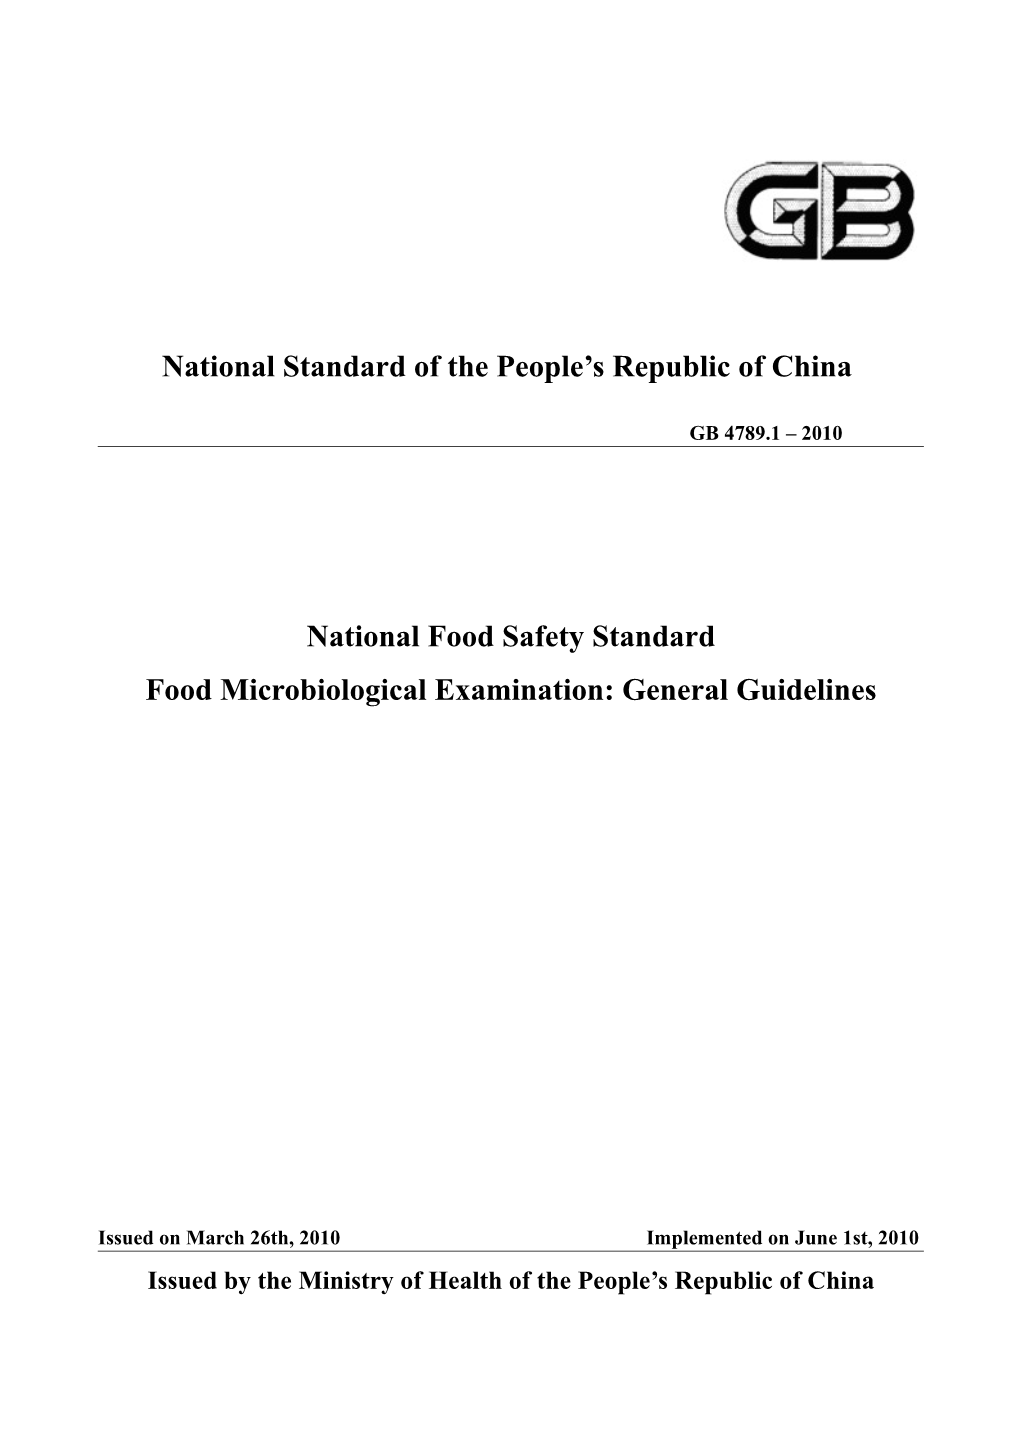 Food Microbiological Examination: General Guidelines